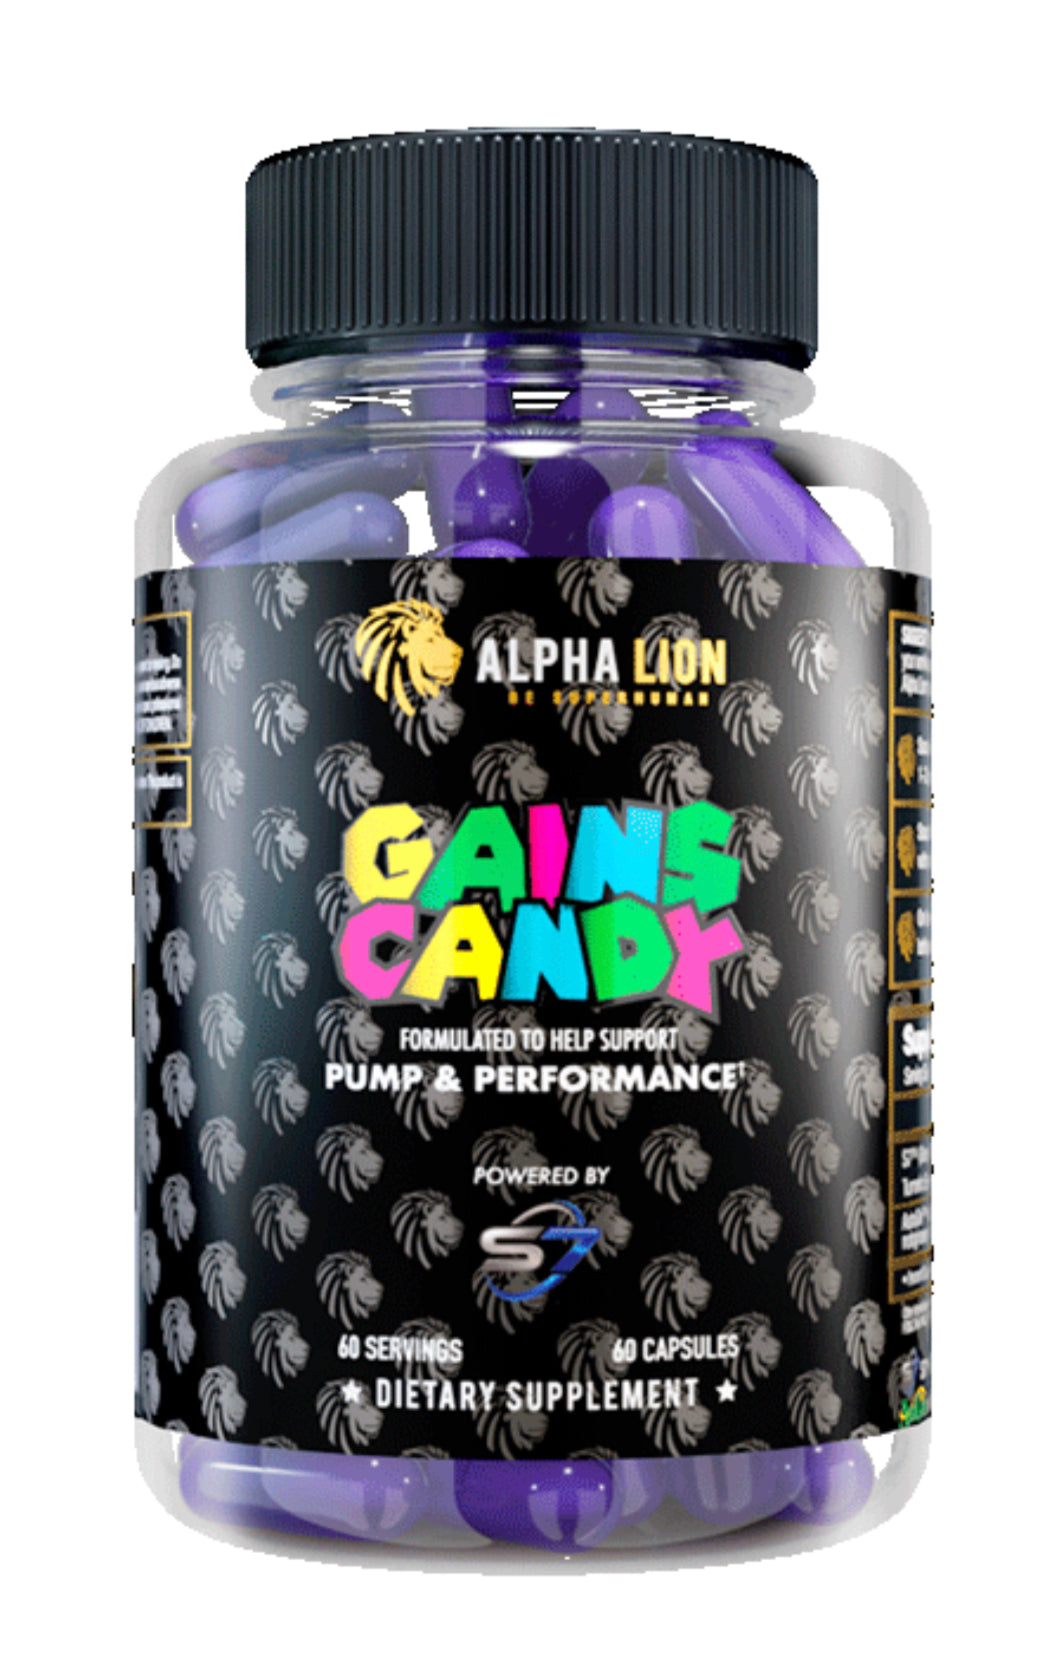 GAINS CANDY™ S7™ - Pump & Performance